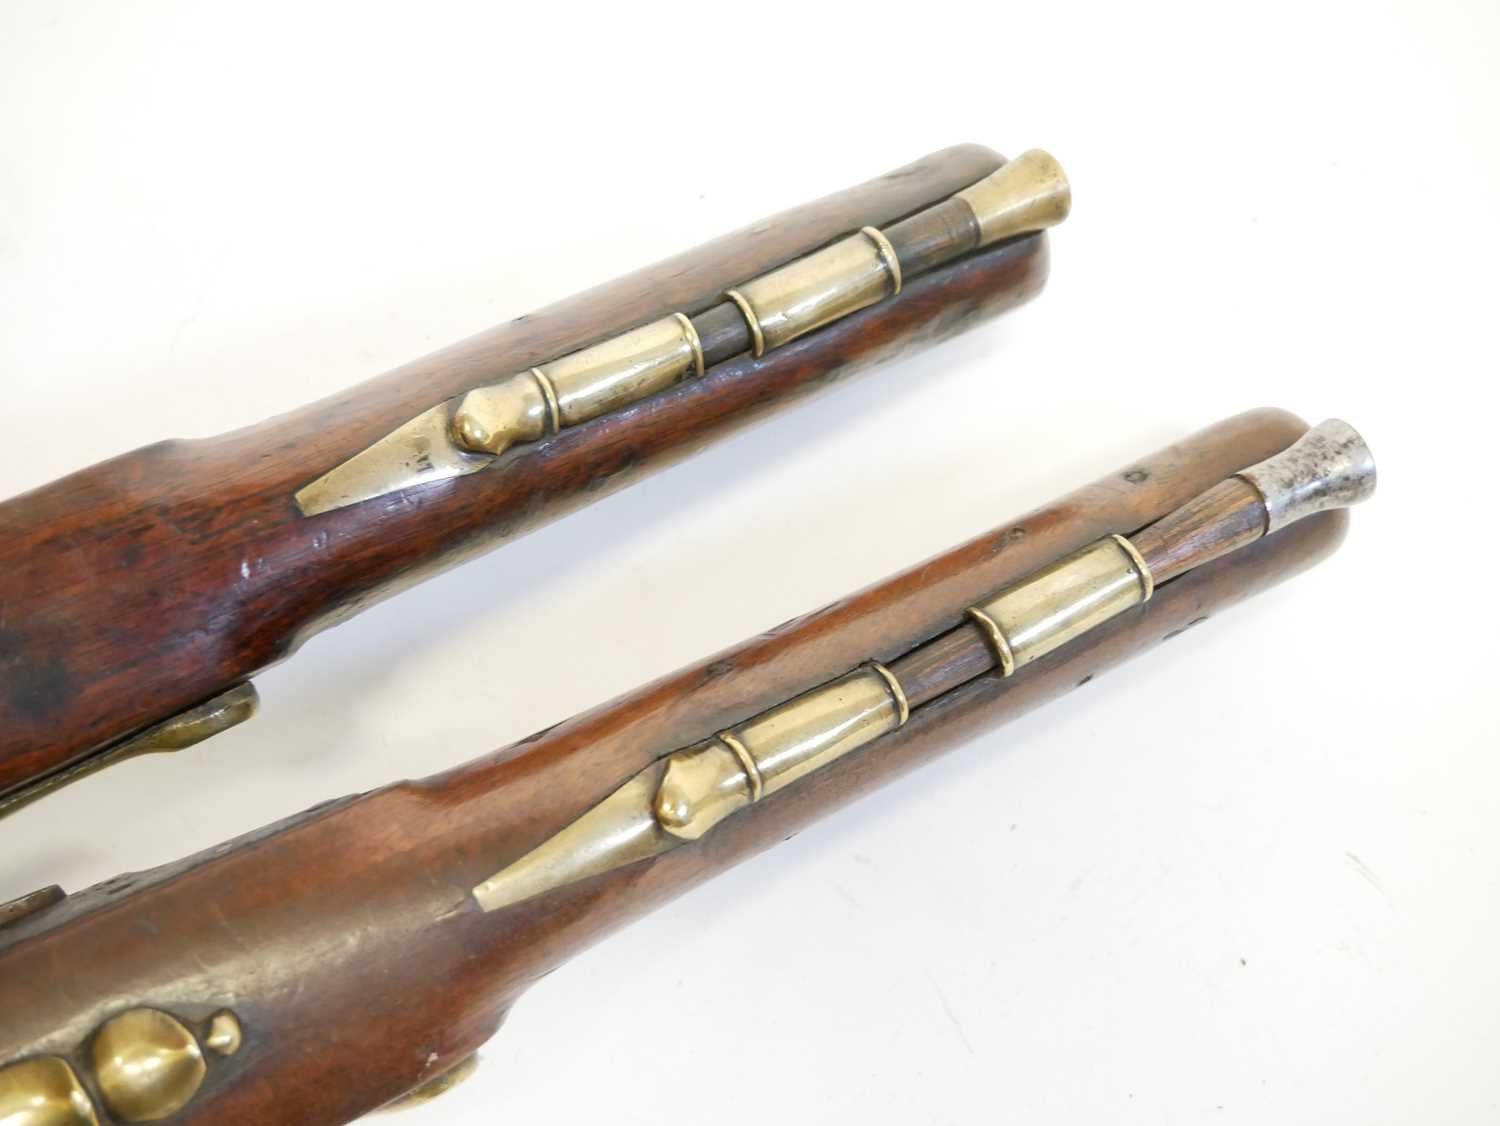 Matched together pair of percussion pistols - Image 5 of 11